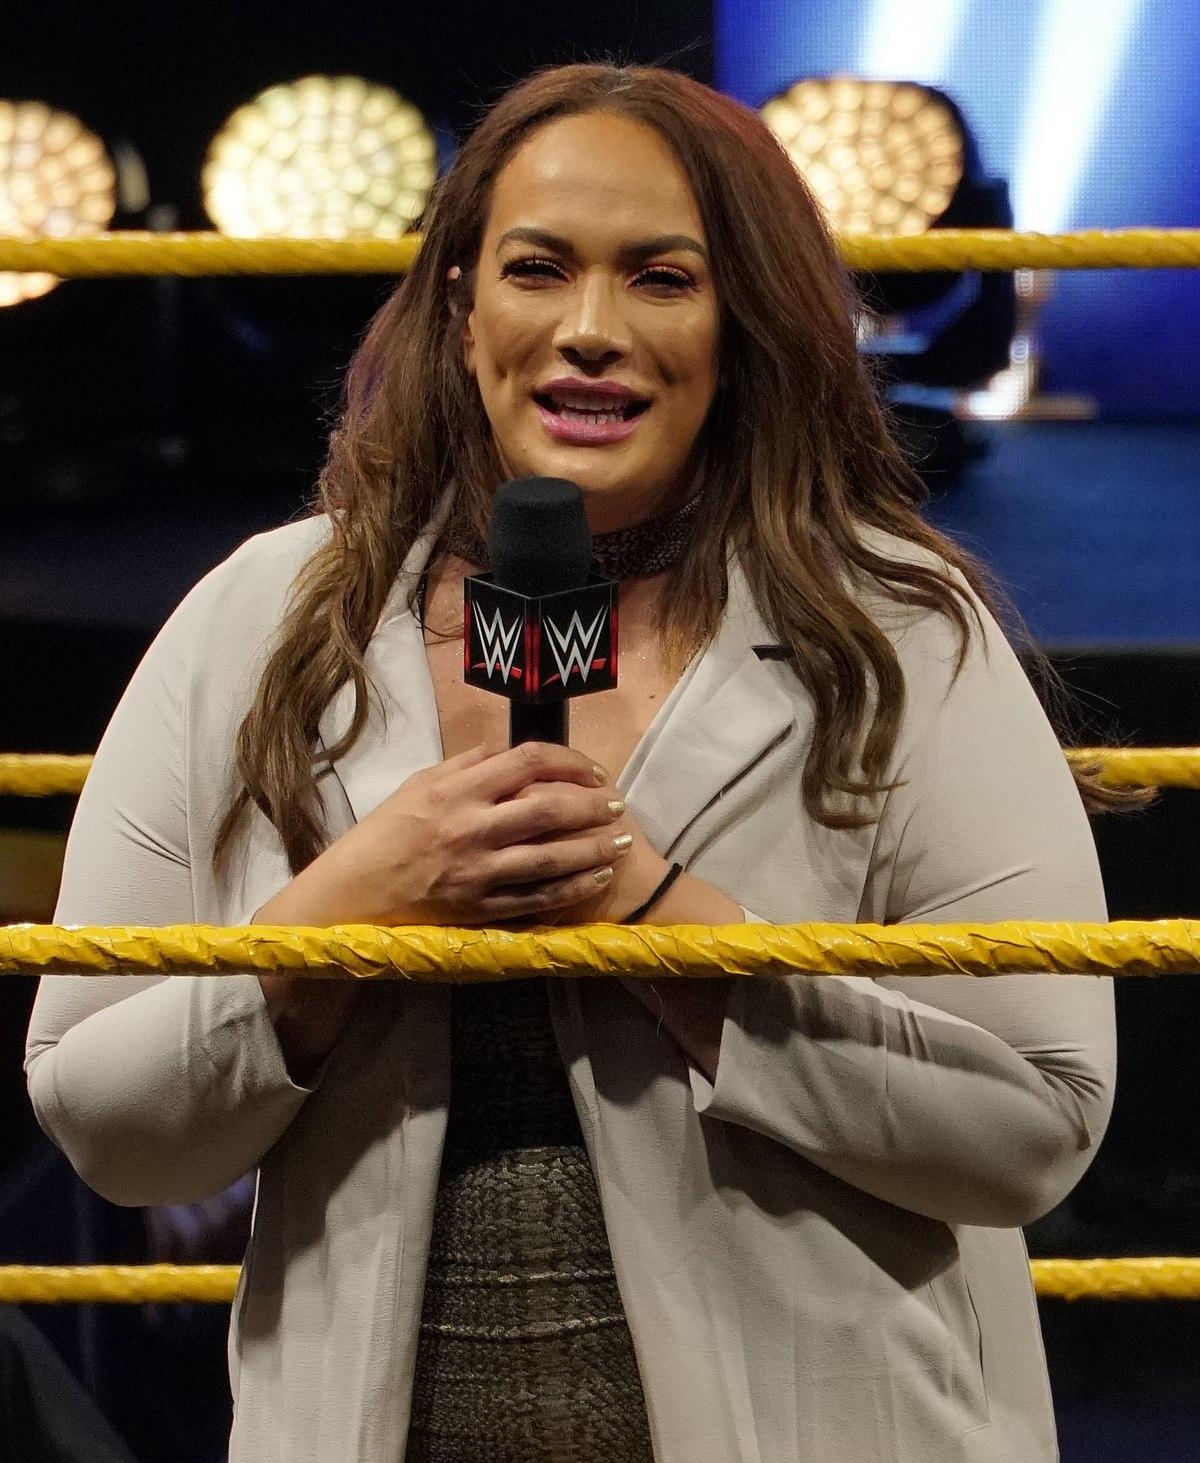 70+ Hot Pictures Of Nia Jax Are Here To Take Your Breath Away 16